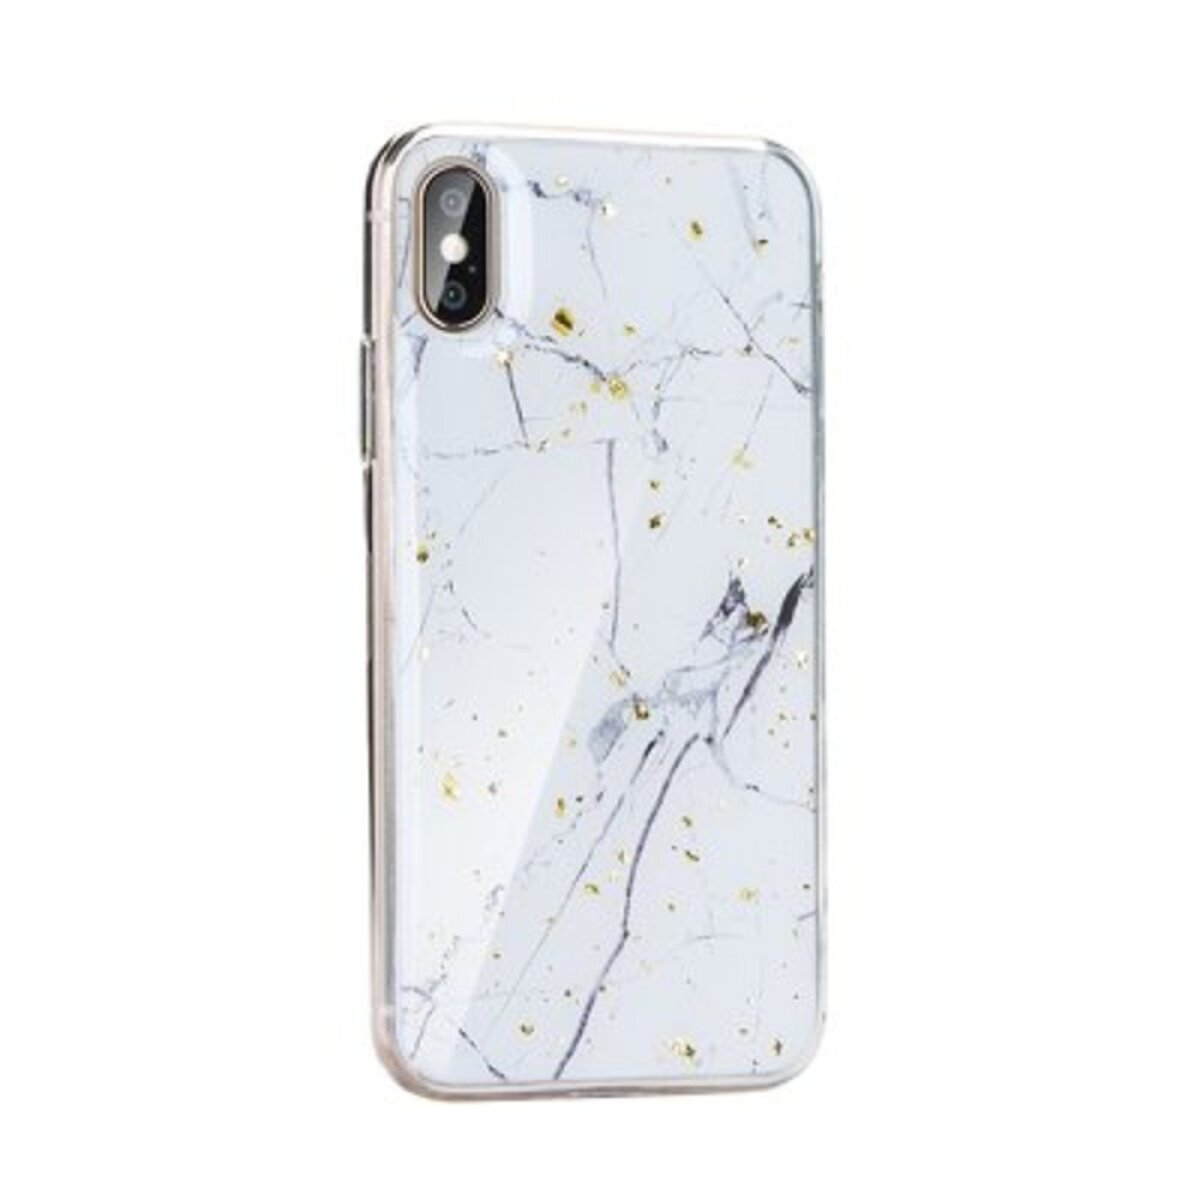 FORCELL MARBLE Case iPhone 11 Bookcover, available Max, Max 1, iPhone design Pro Apple, 11 Not Pro